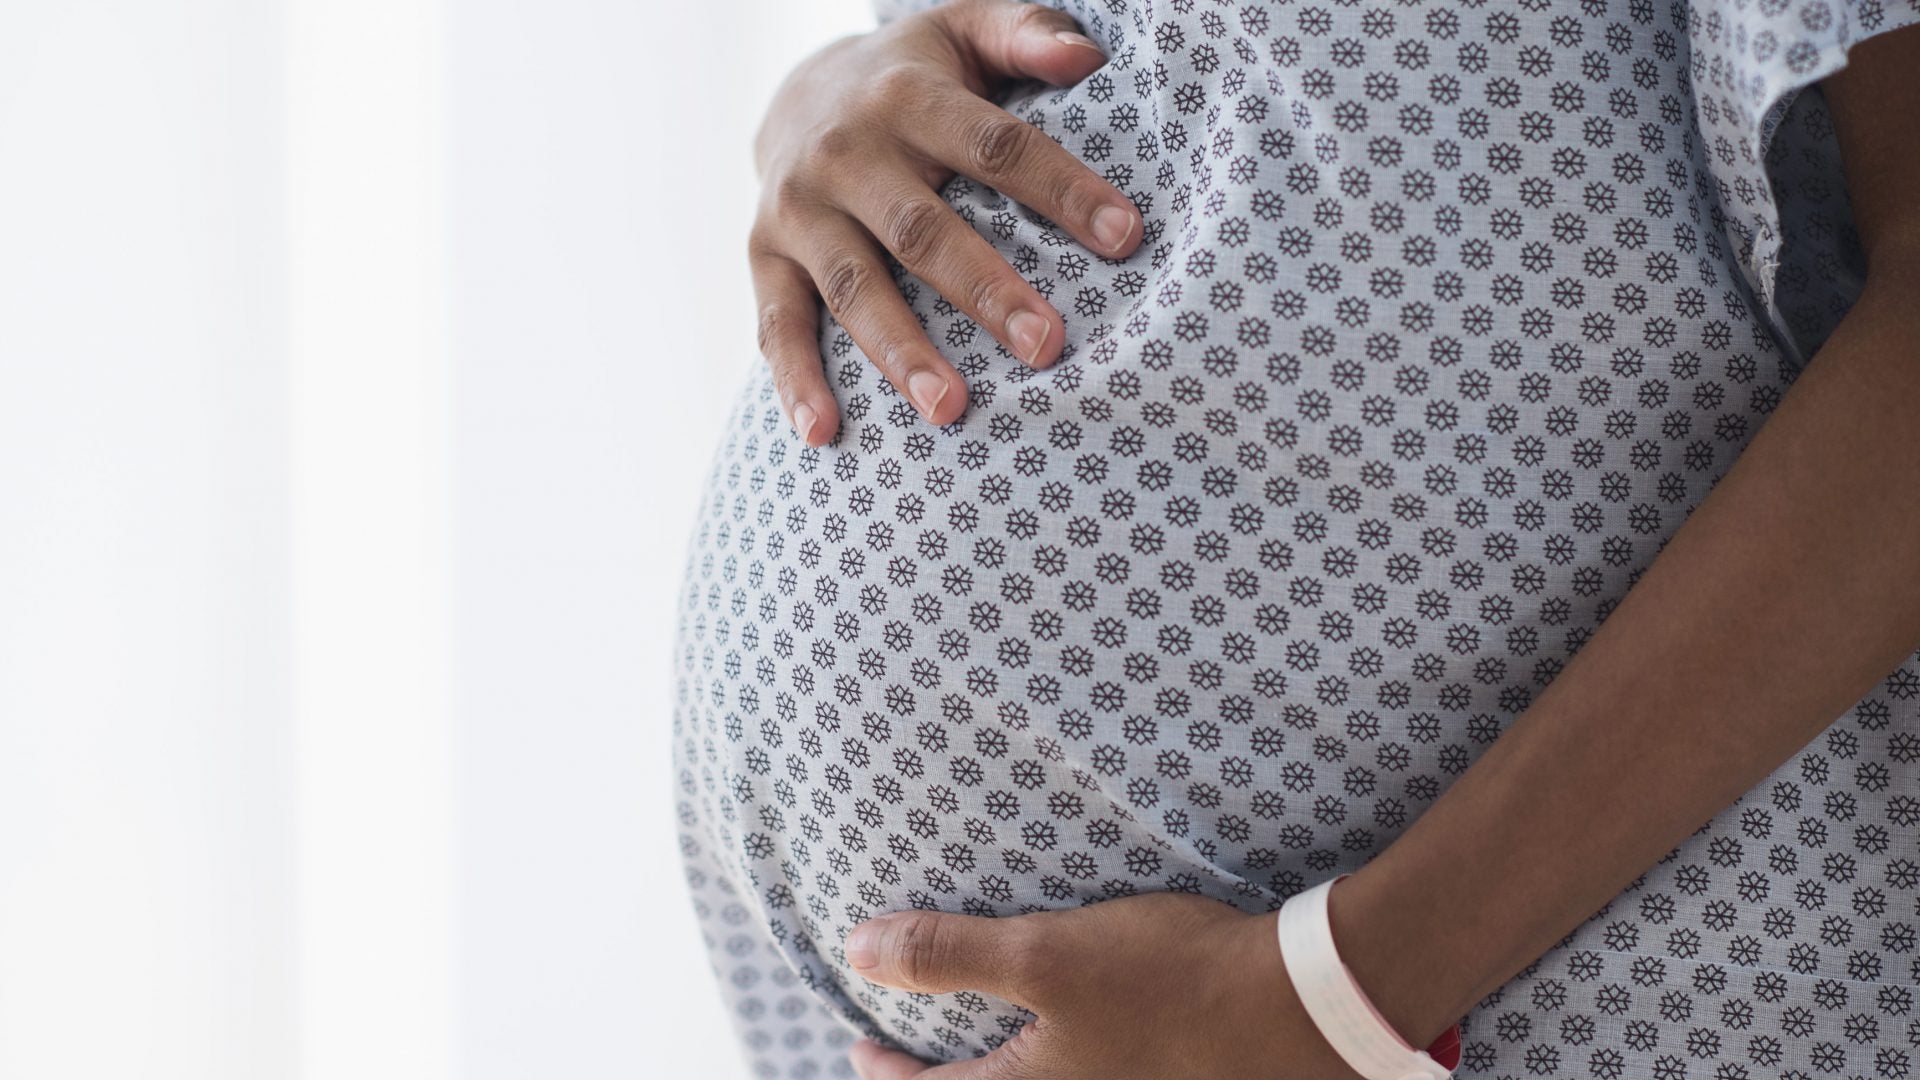 Black Obstetrician-Gynecologists Talk About Improving Black Maternal Health